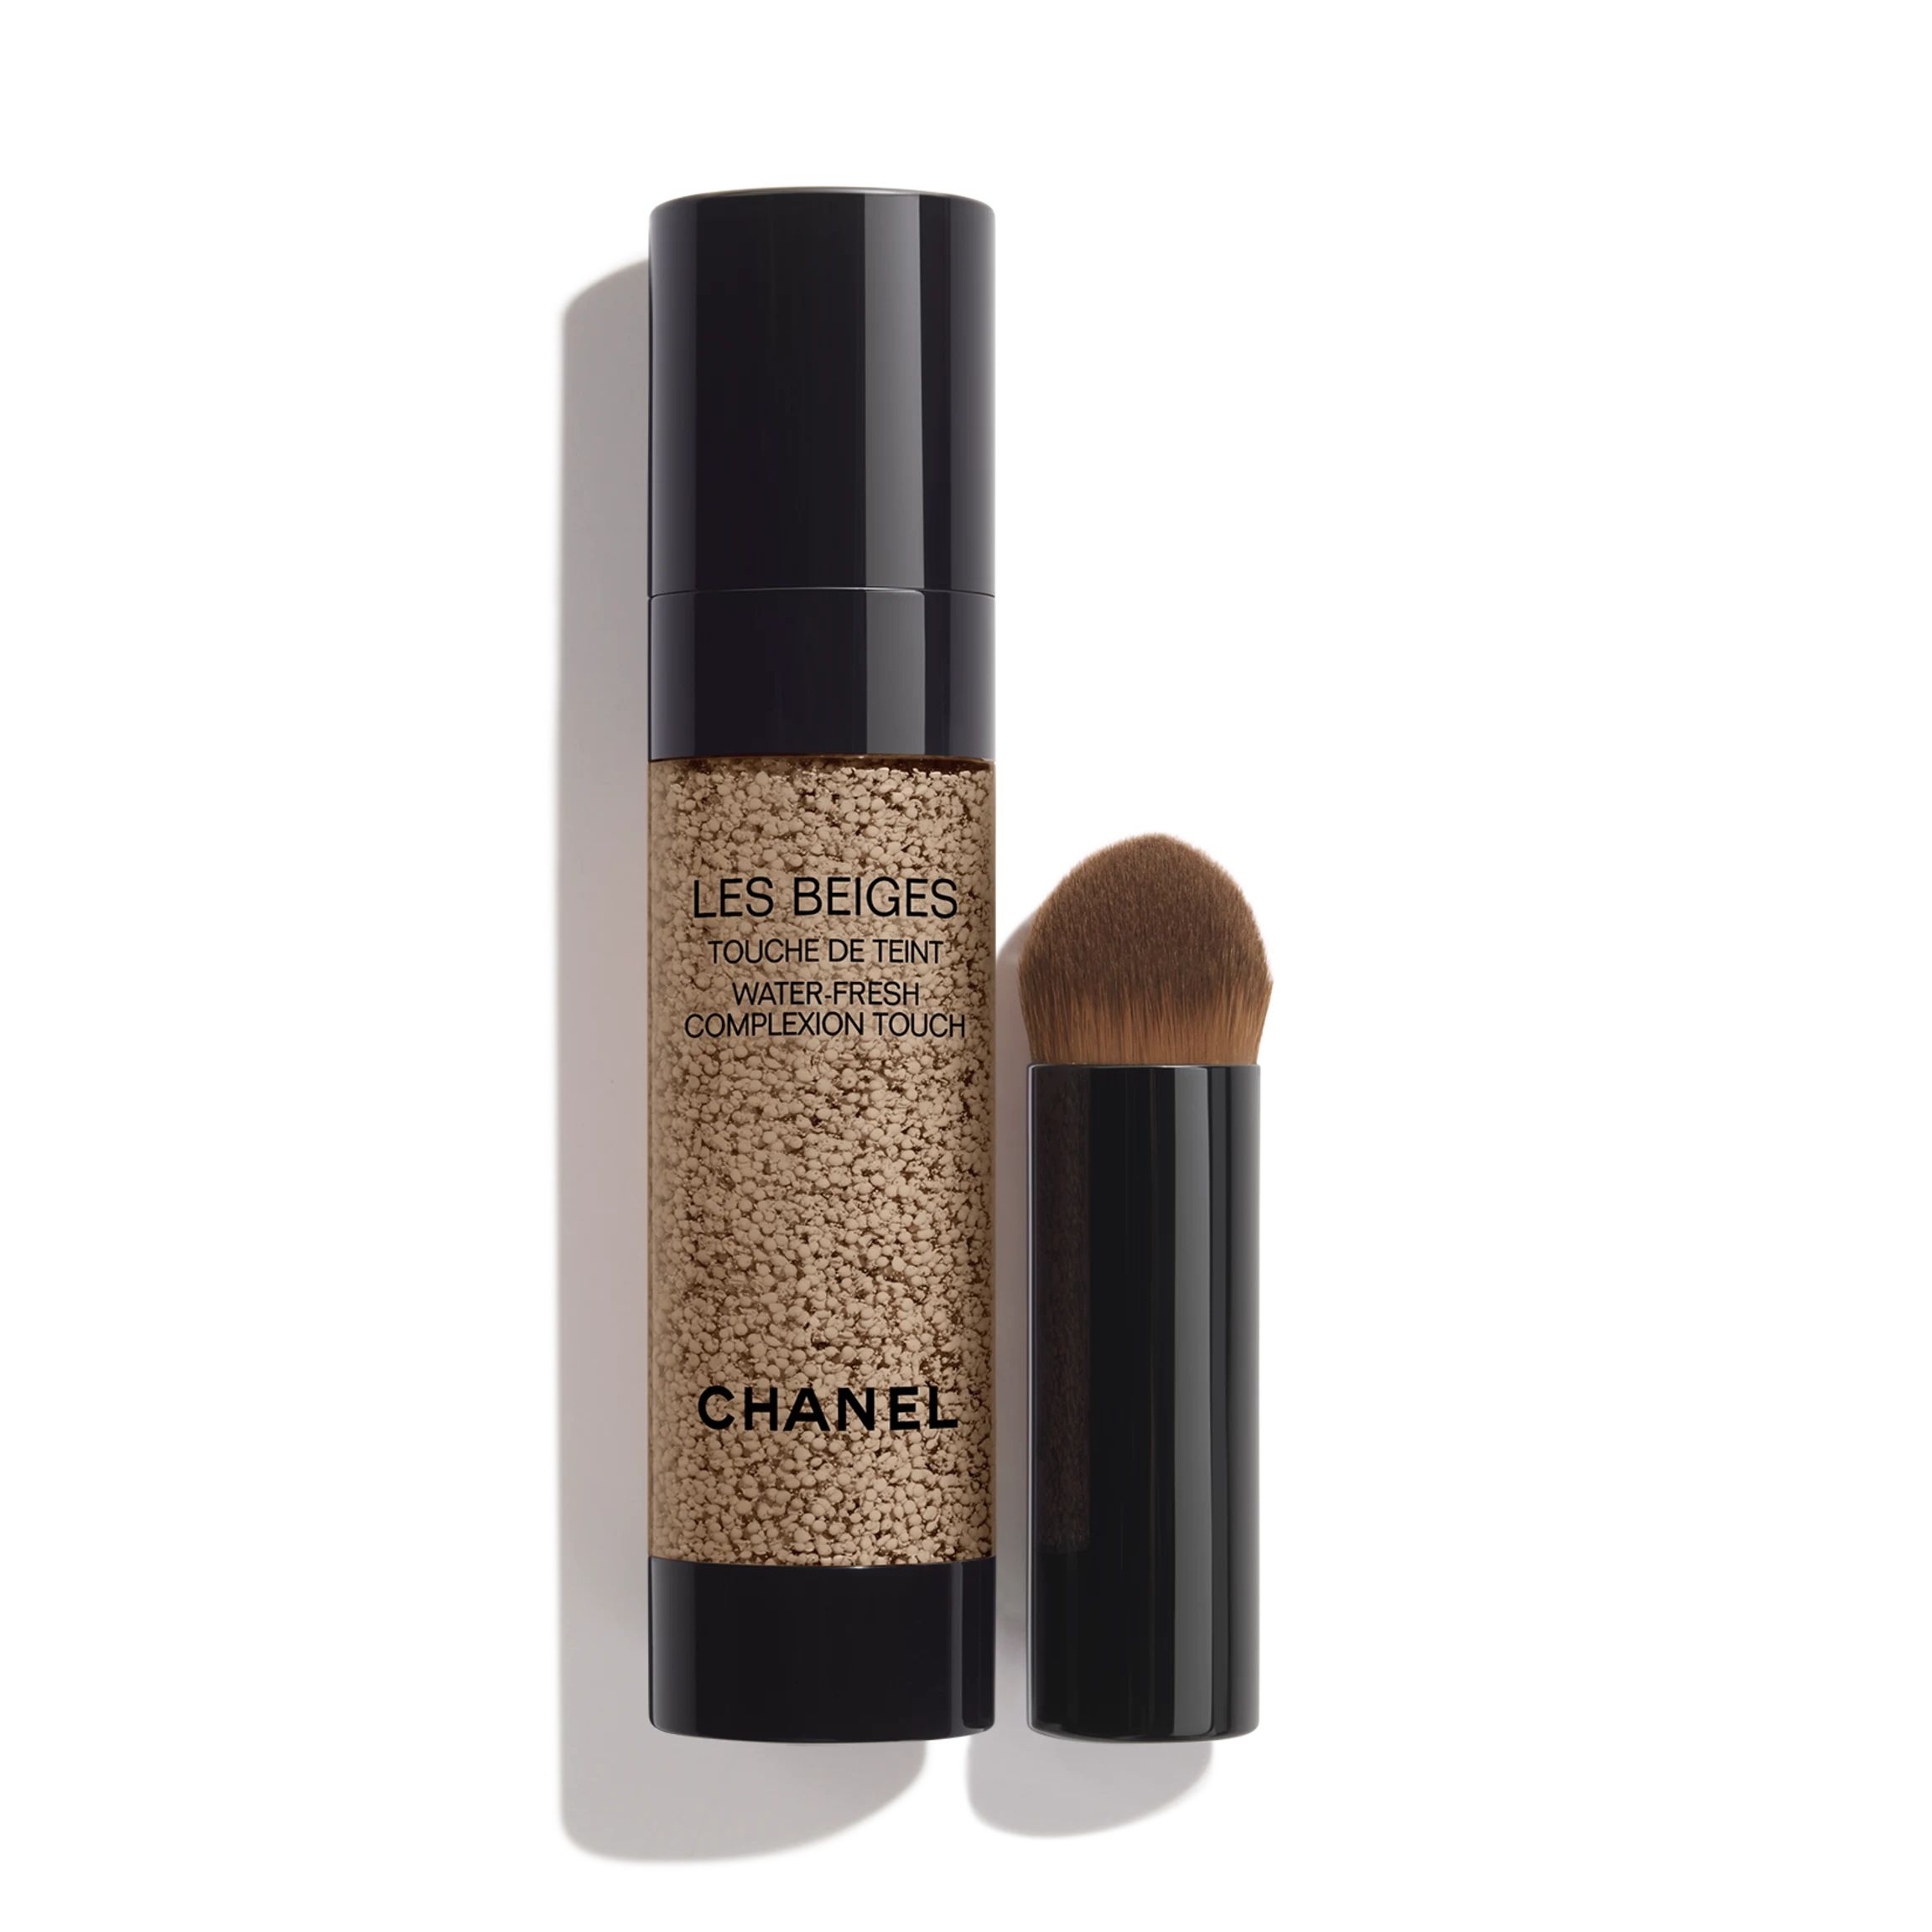 LES BEIGES Water-fresh complexion touch B20 | CHANEL | Chanel, Inc. (US)